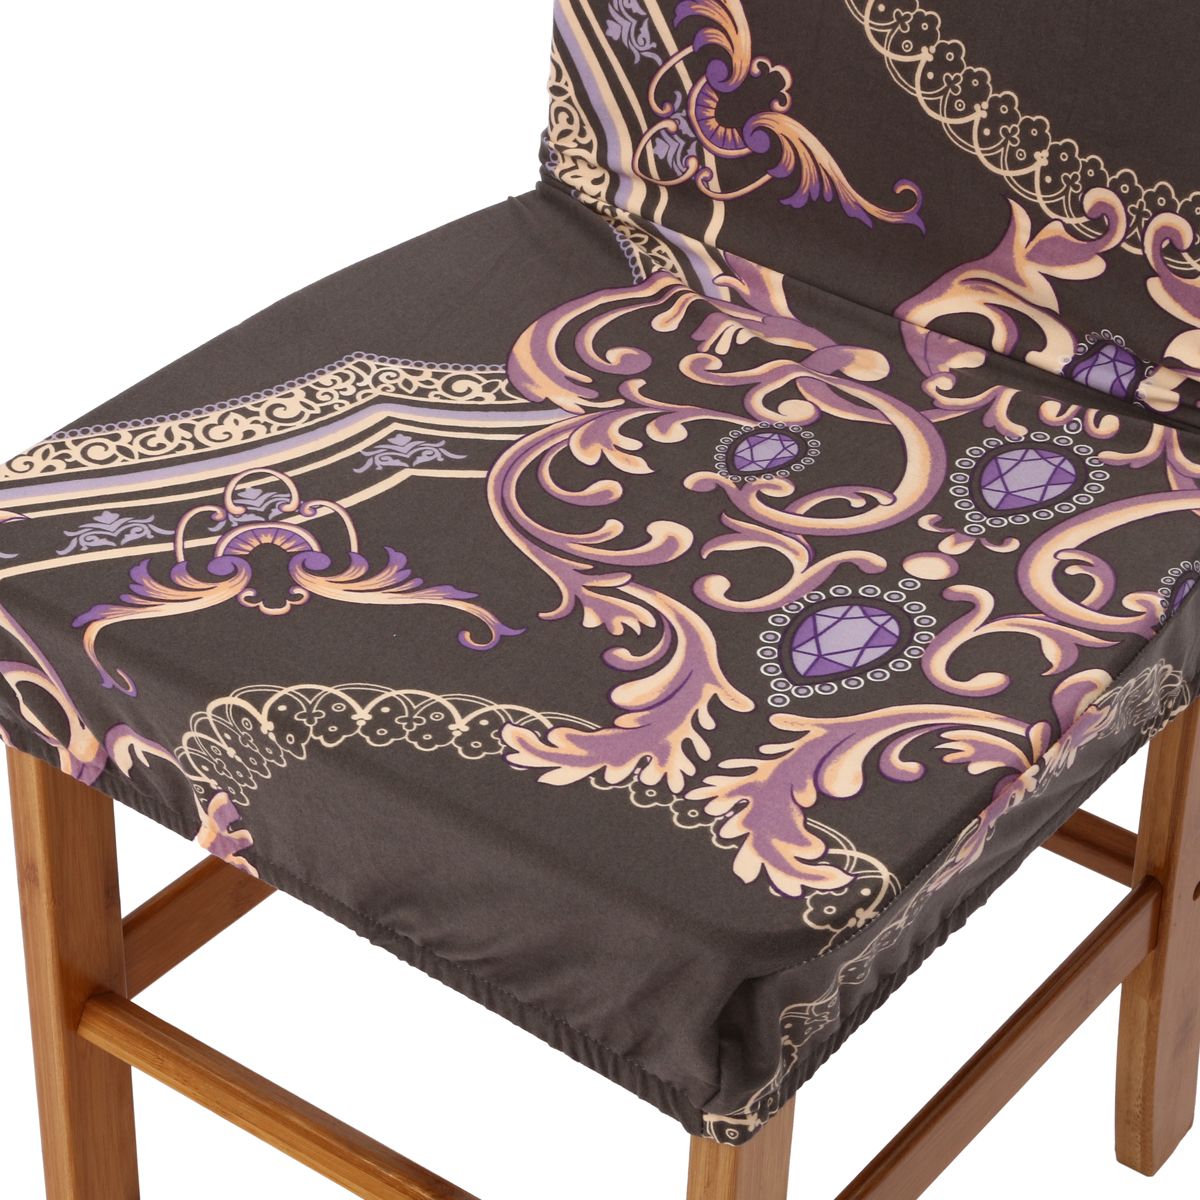 Dining-Room-Wedding-Banquet-Chair-Covers-Party-Decor-Seat-Cover-Stretch-Spandex-1468124